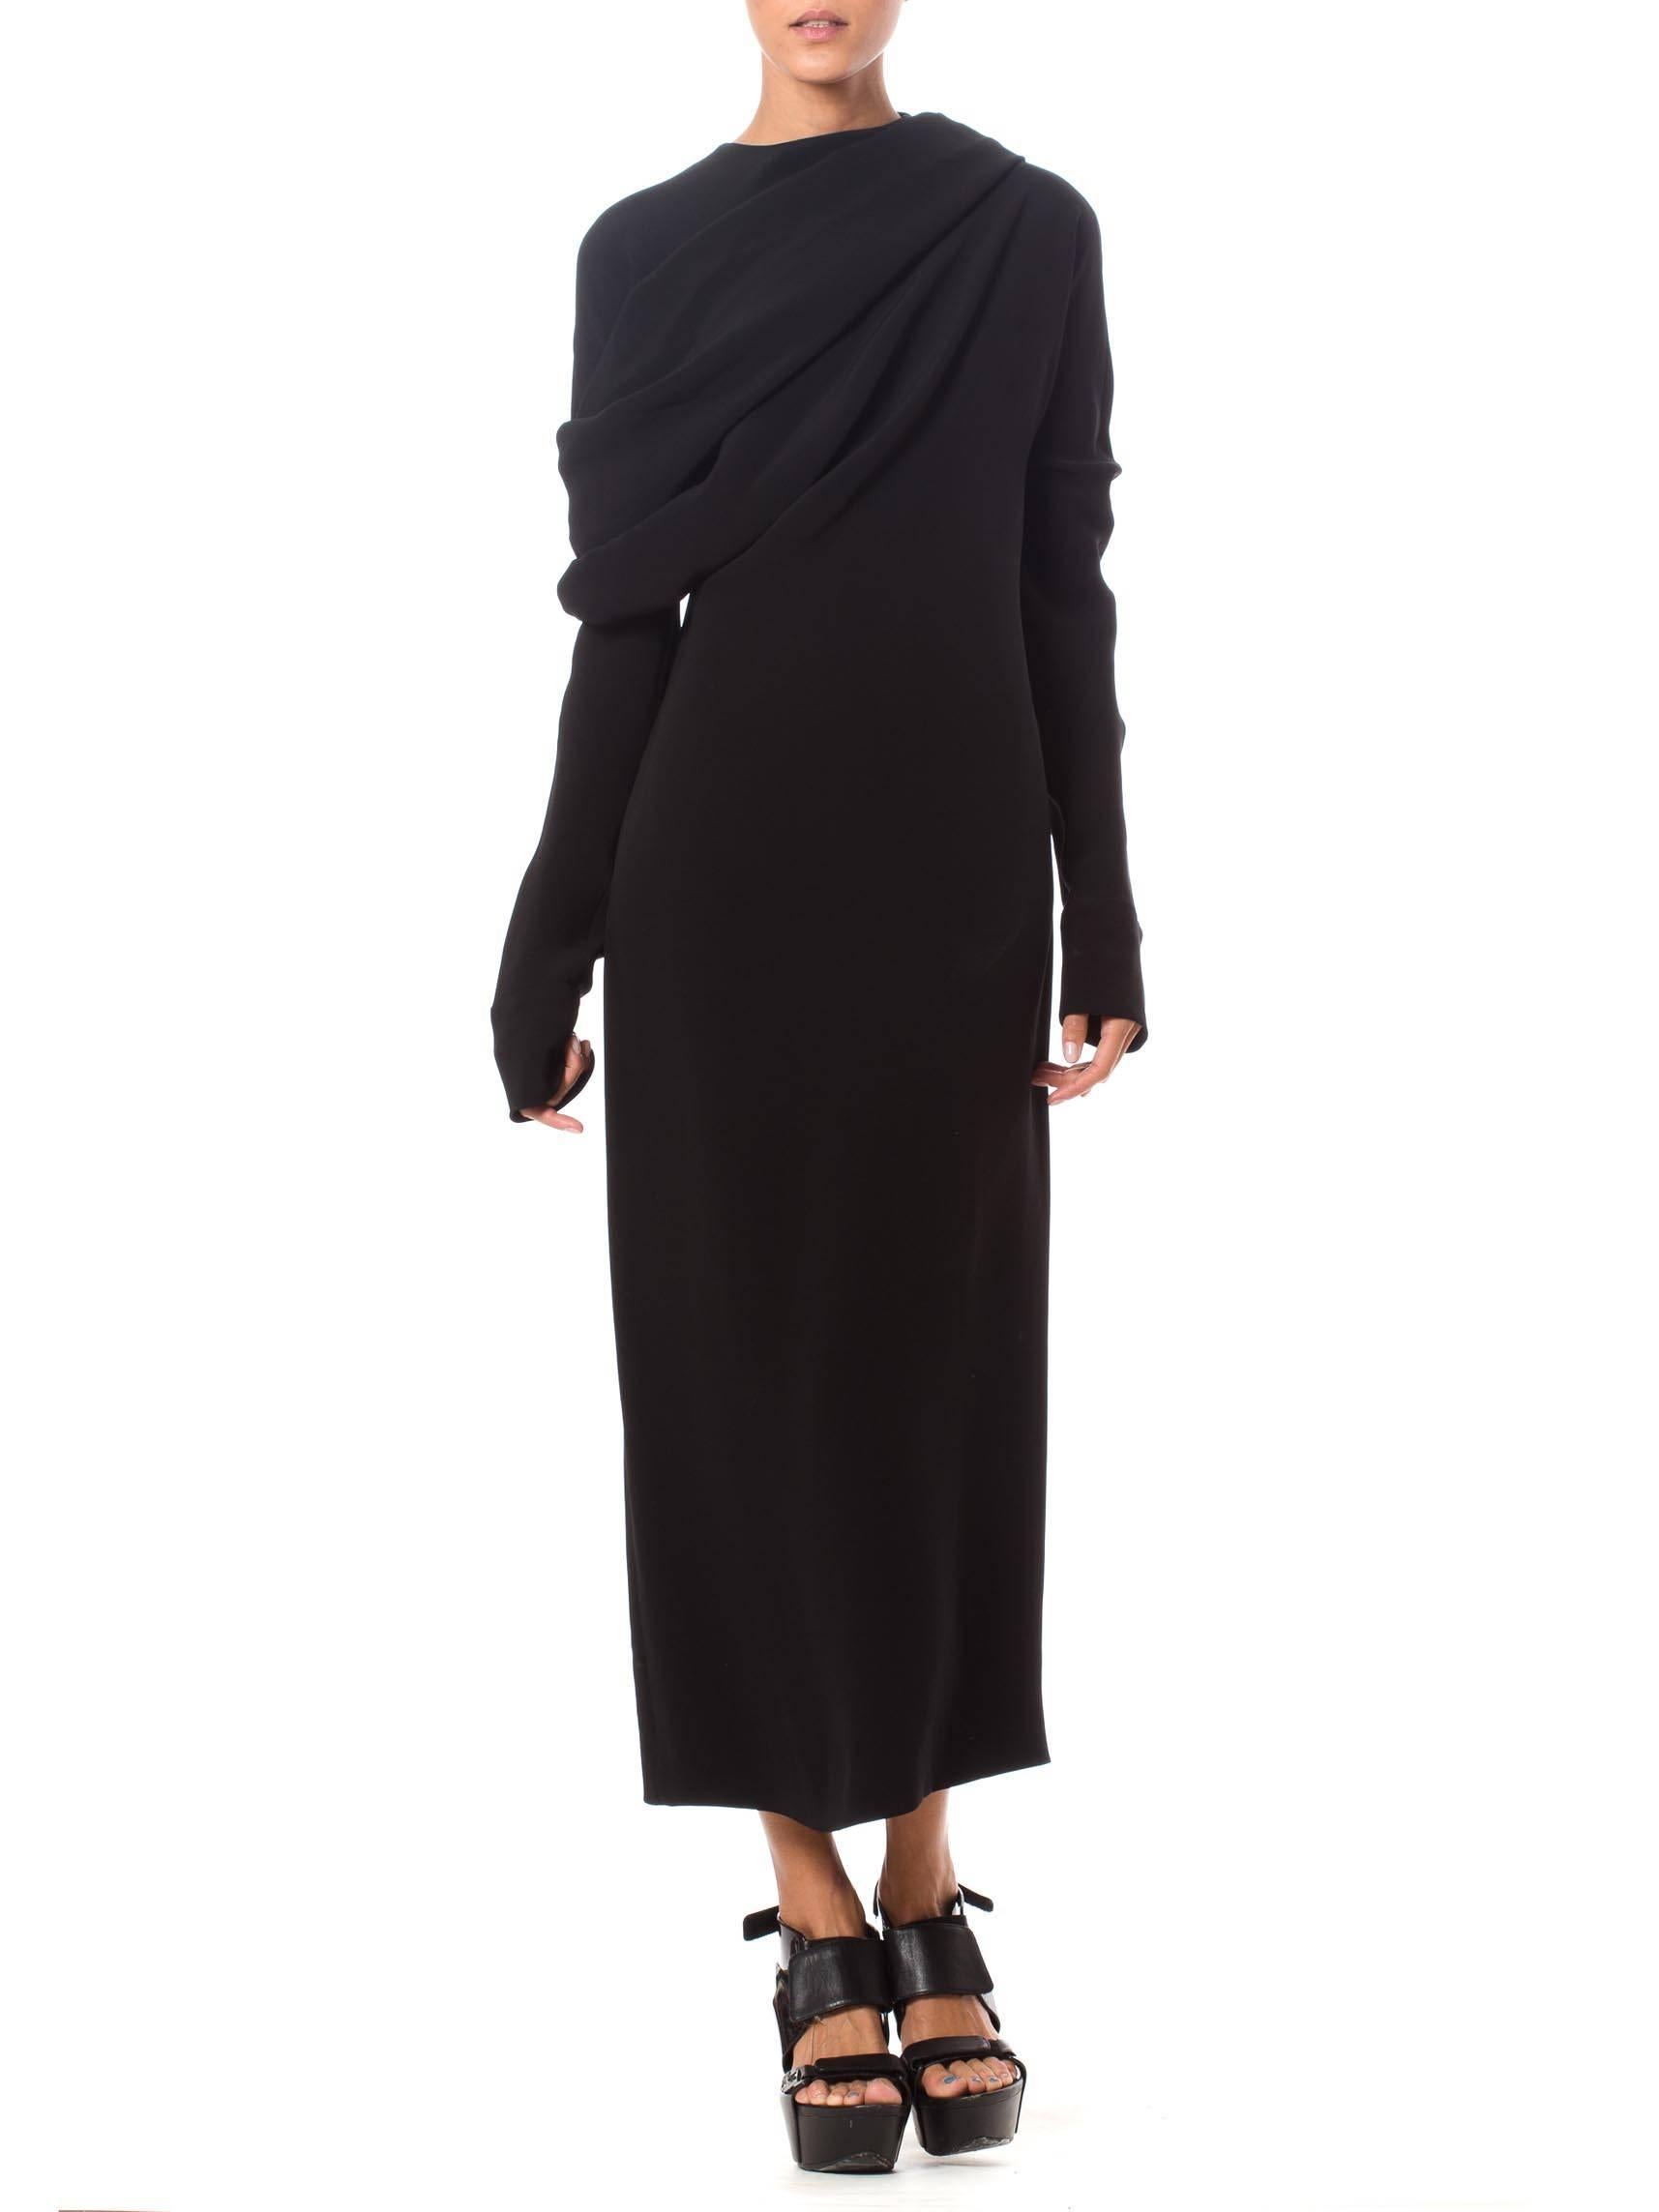 This is an elegant black dress with extra-long sleeves and an asymmetrical draped detail across the shoulders and bust, genius in pattern cutting and draping. The overall silhouette of the dress is simple and classic, while the careful draping on